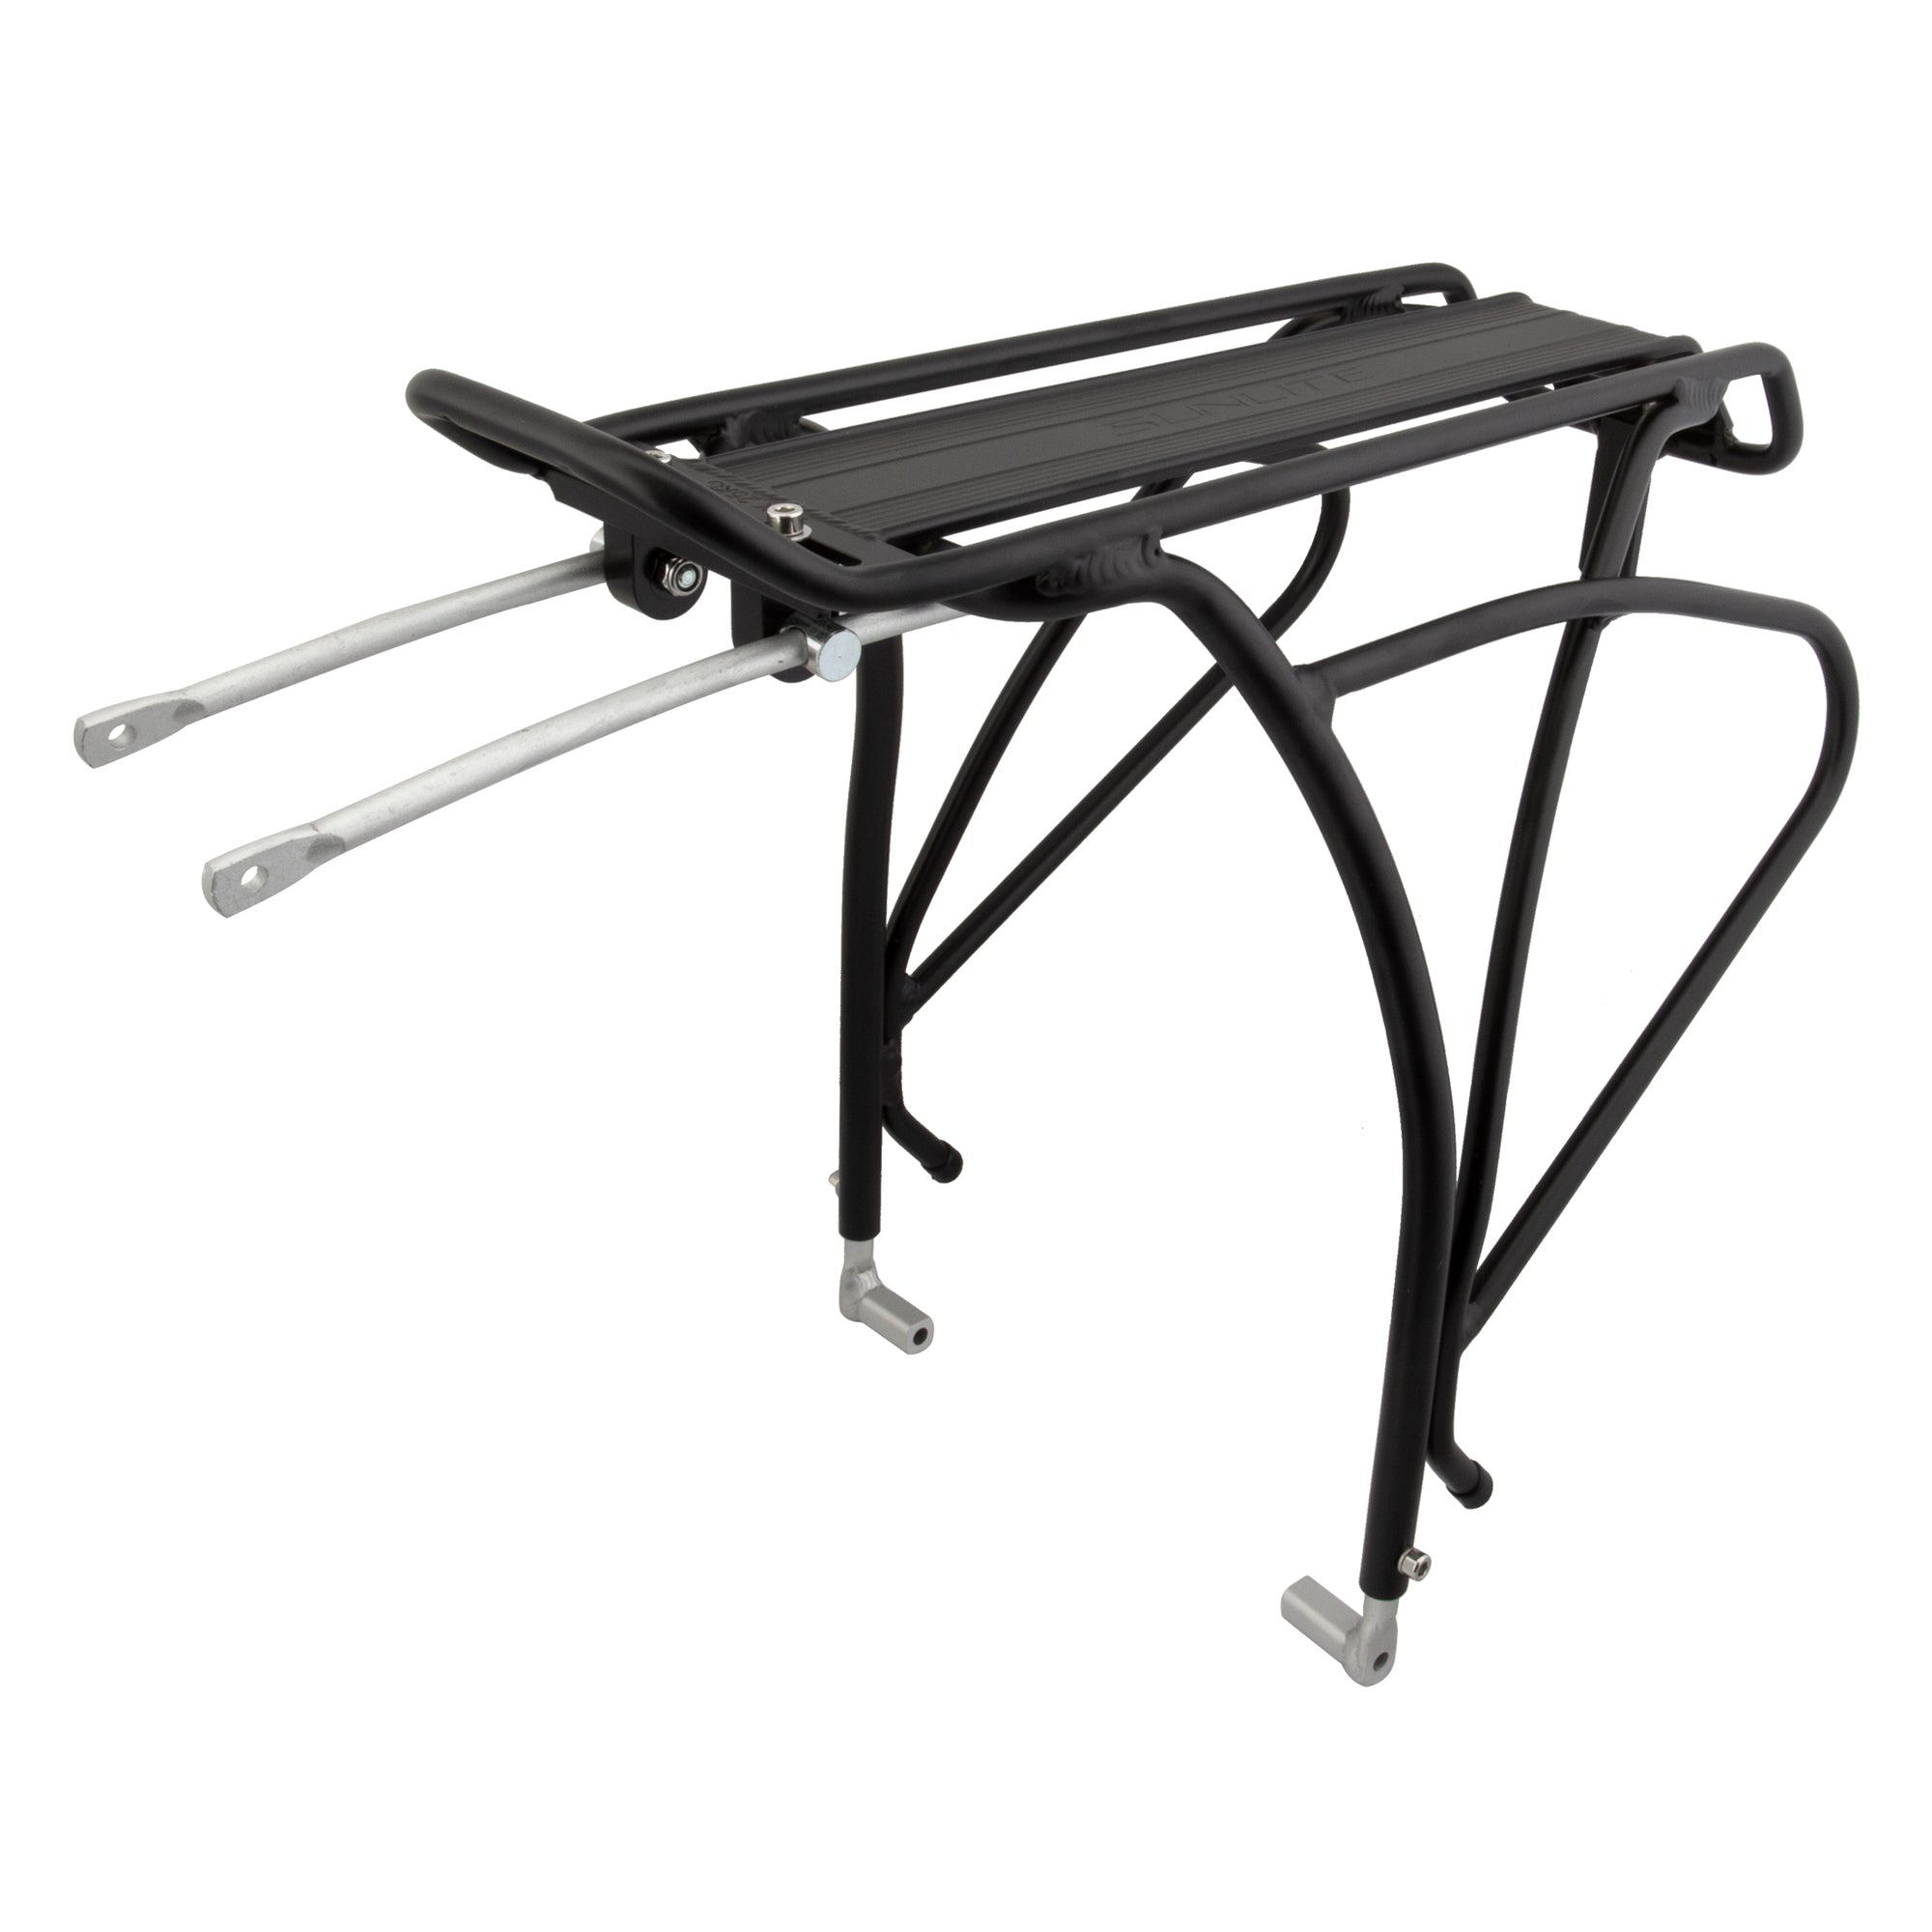 Sunlite Gold Tec Disc Rack - Downtown Bicycle Works 